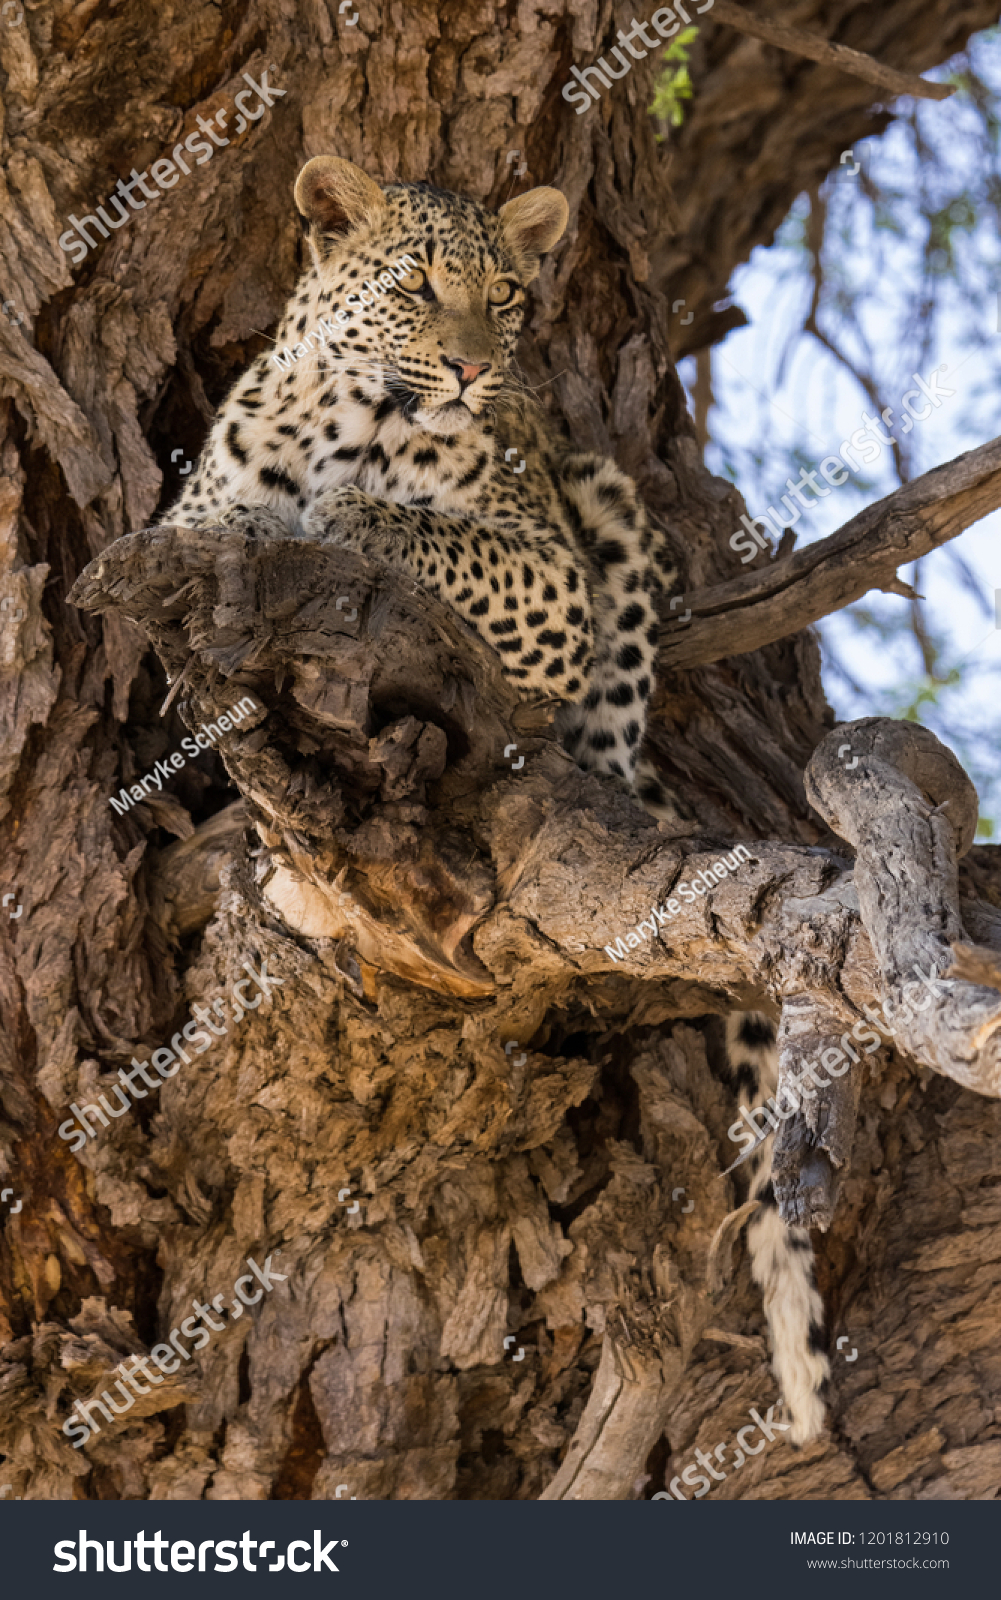 Portrait of a leopard lying in a camel thorn tree in soft light in Kgalagadi (Africa) looking cautiously; Panthera pardus #1201812910